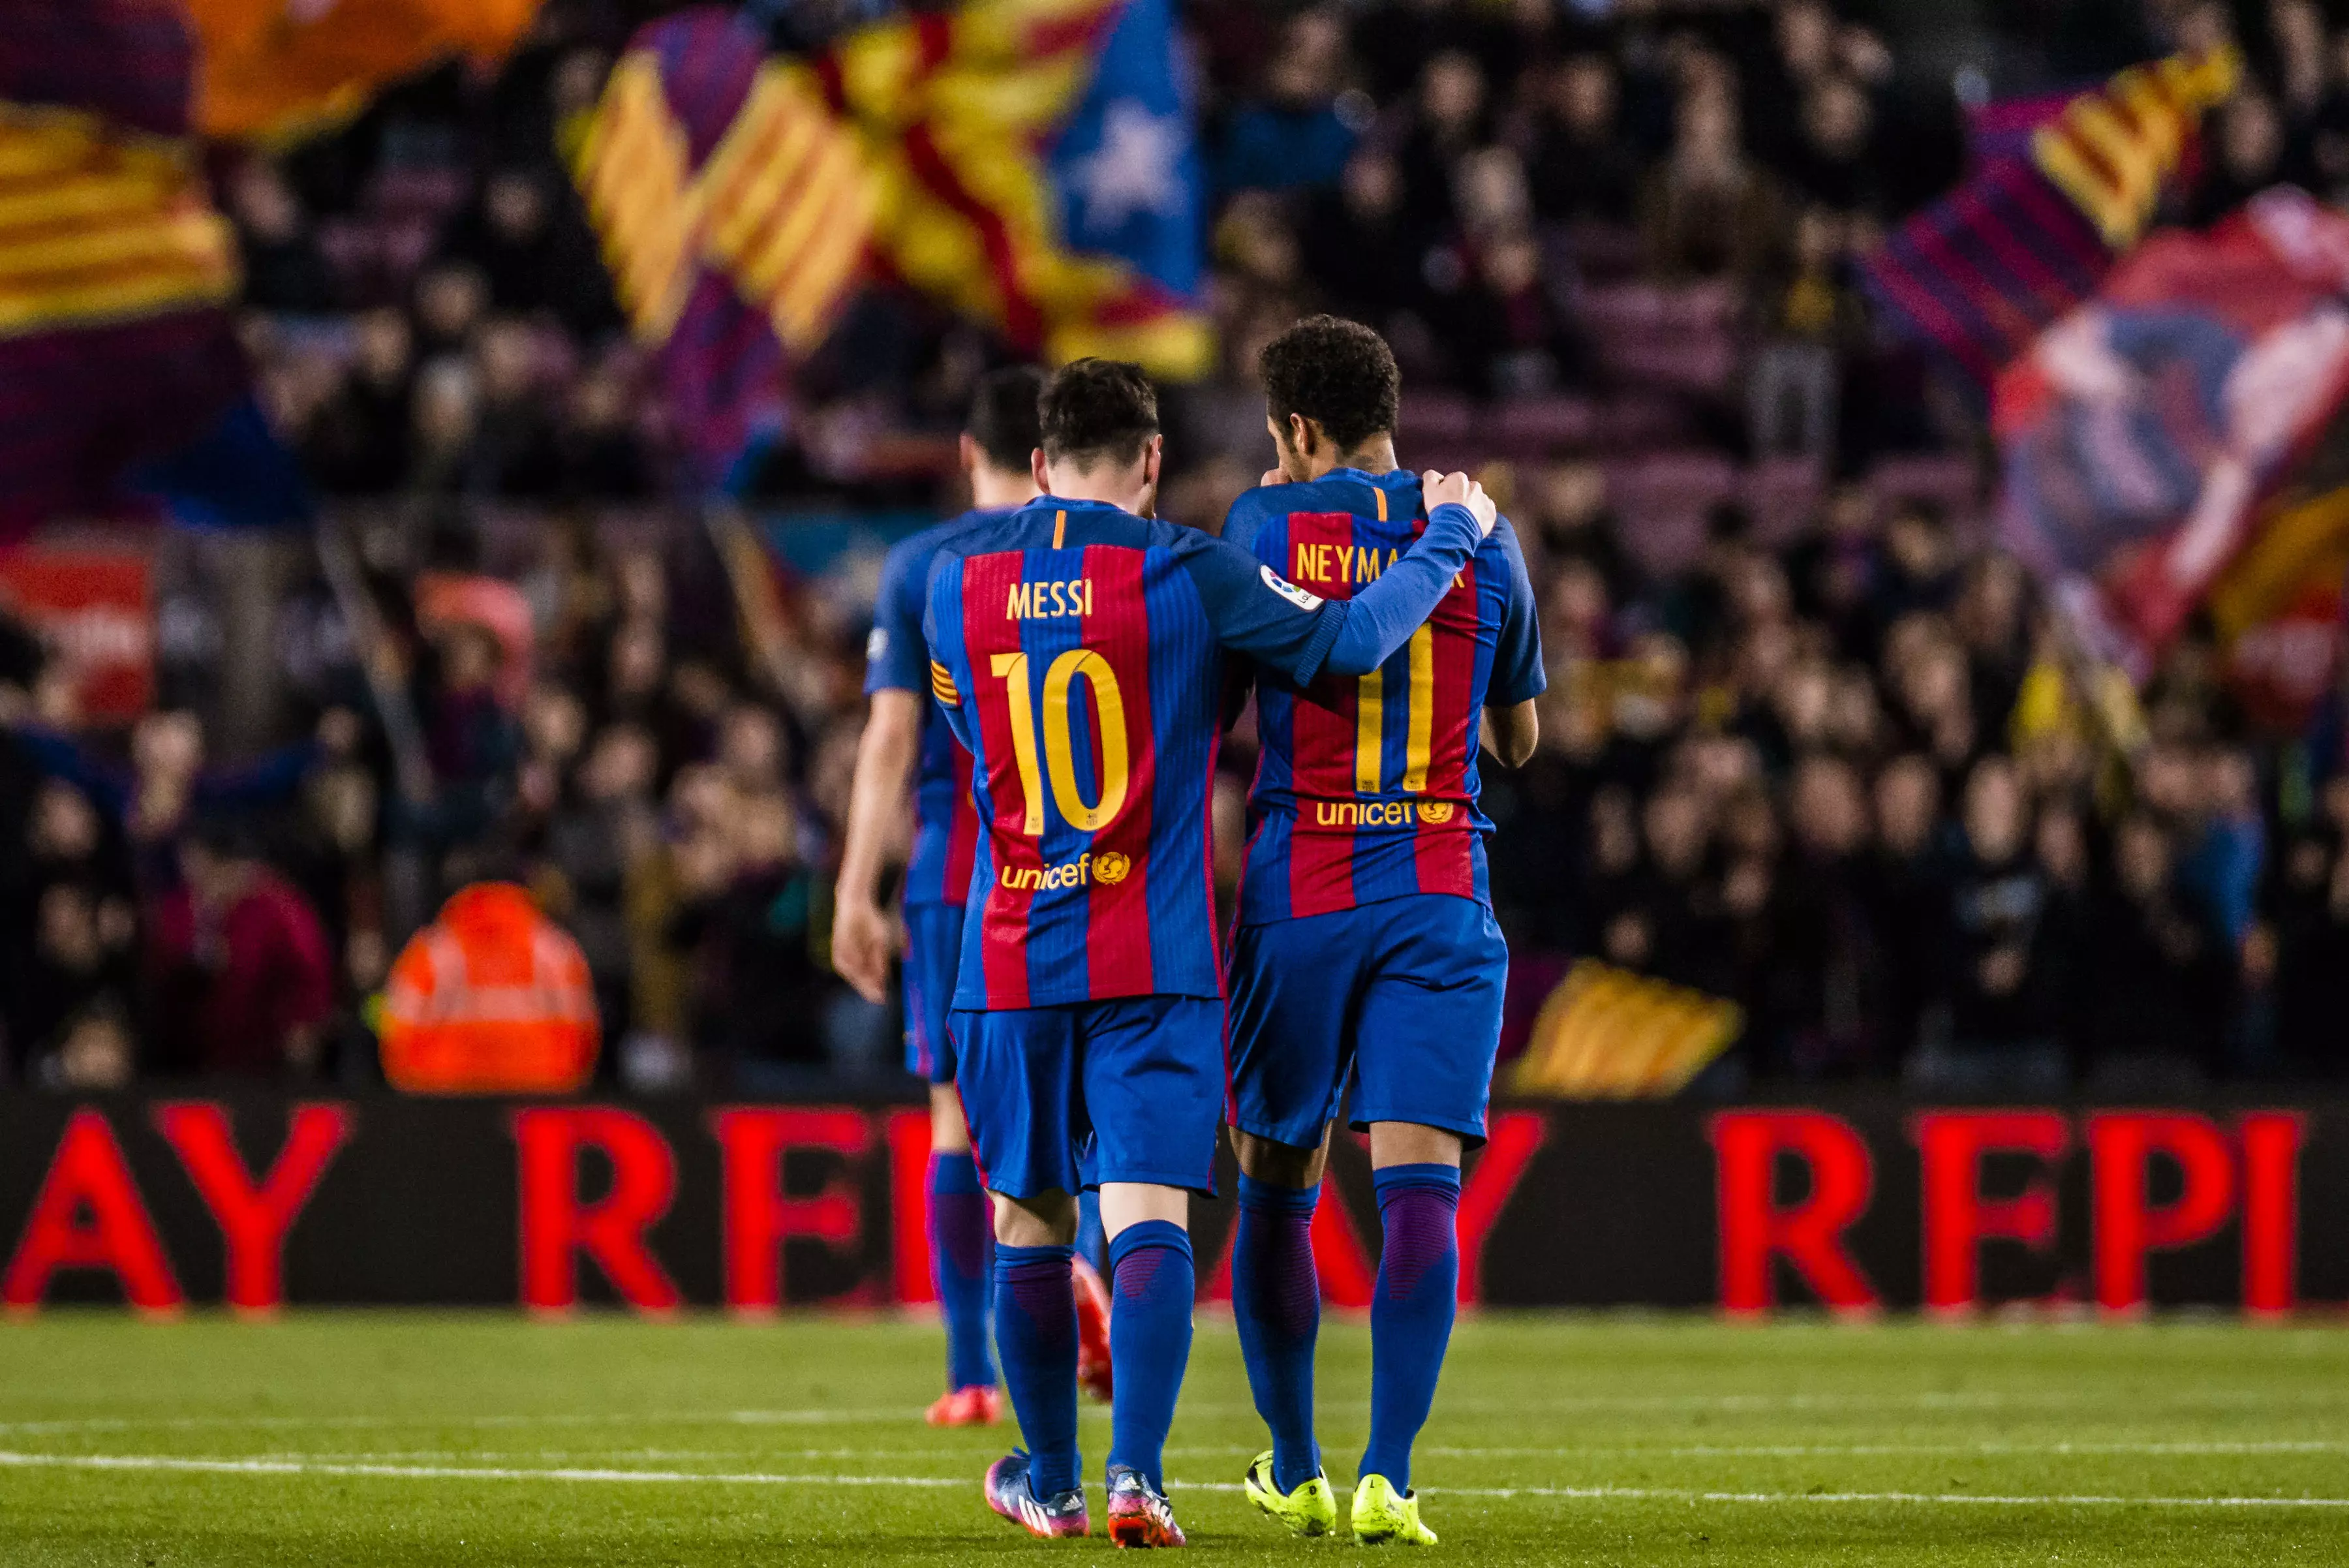 Messi and Neymar back together again would be frightening for any opposition. Image: PA Images